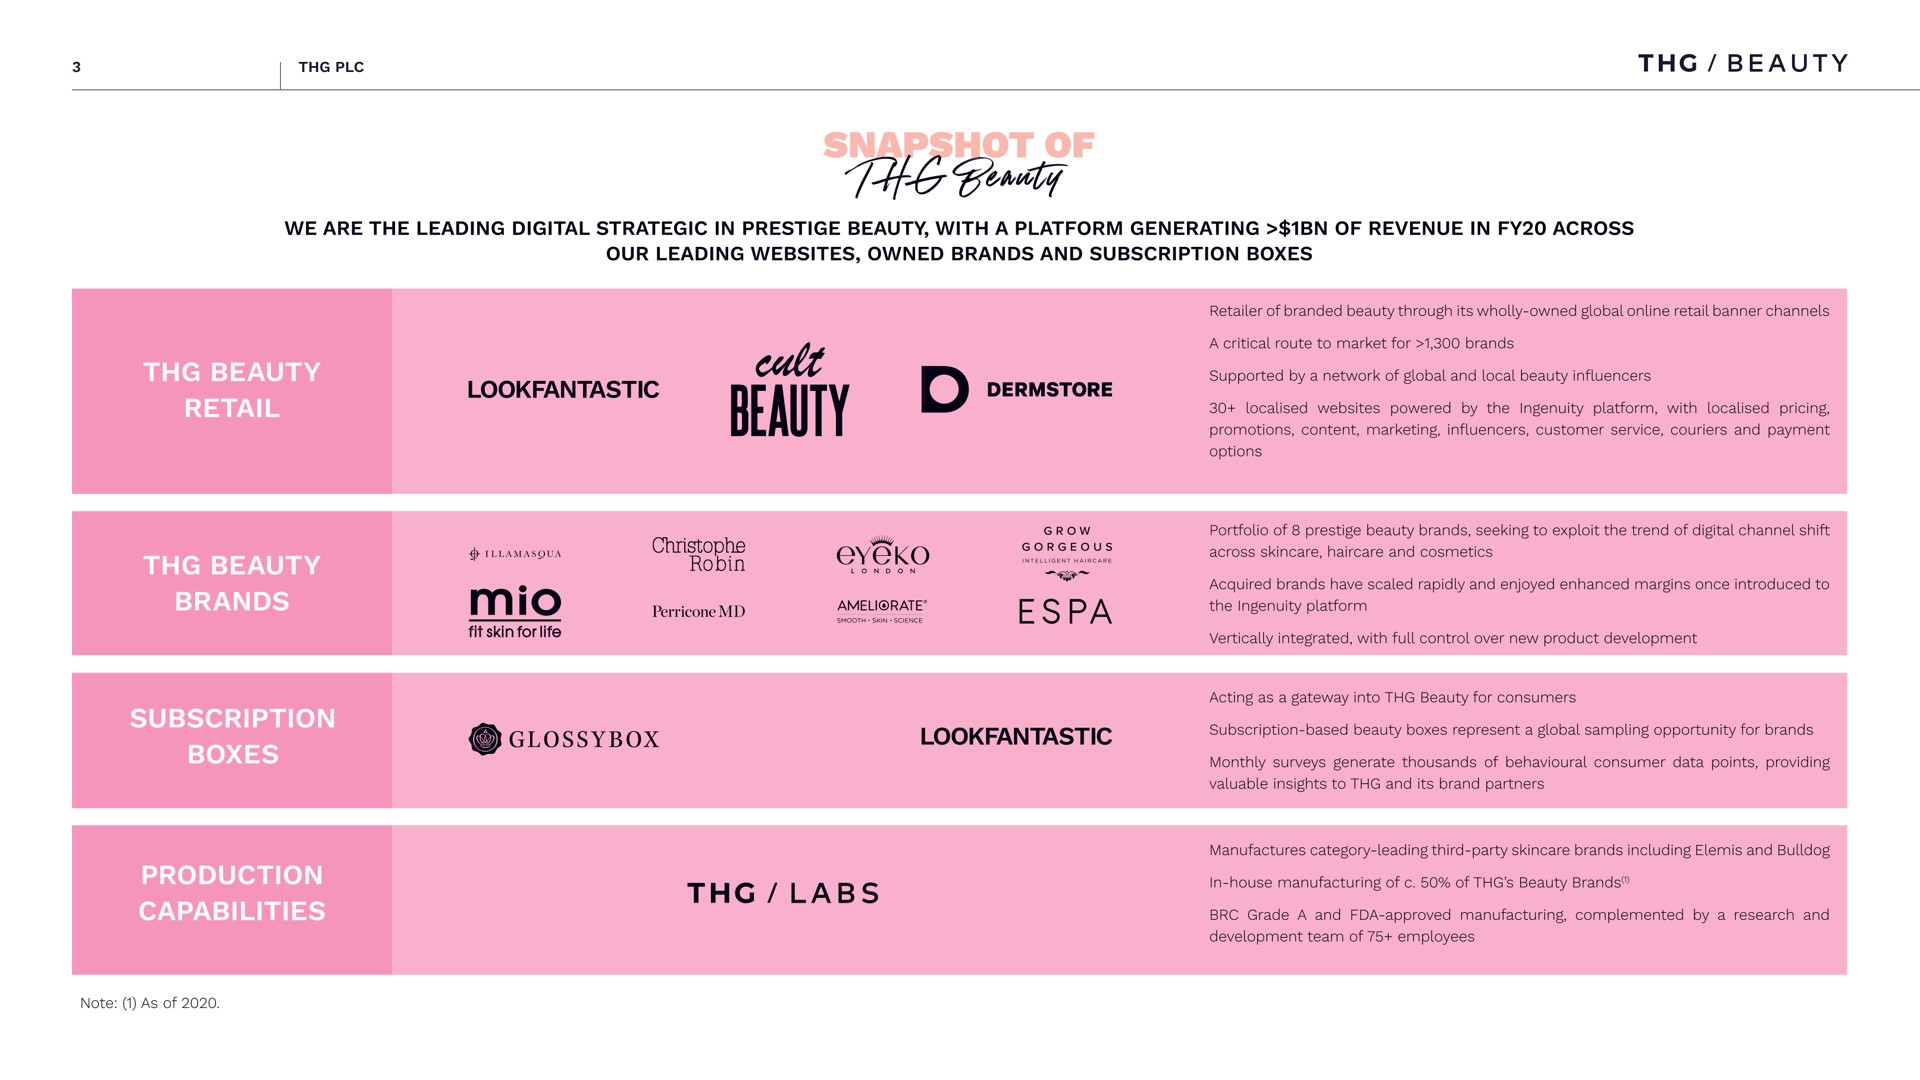 beauty the of beauty retail beauty brands subscription boxes production capabilities | The Hut Group